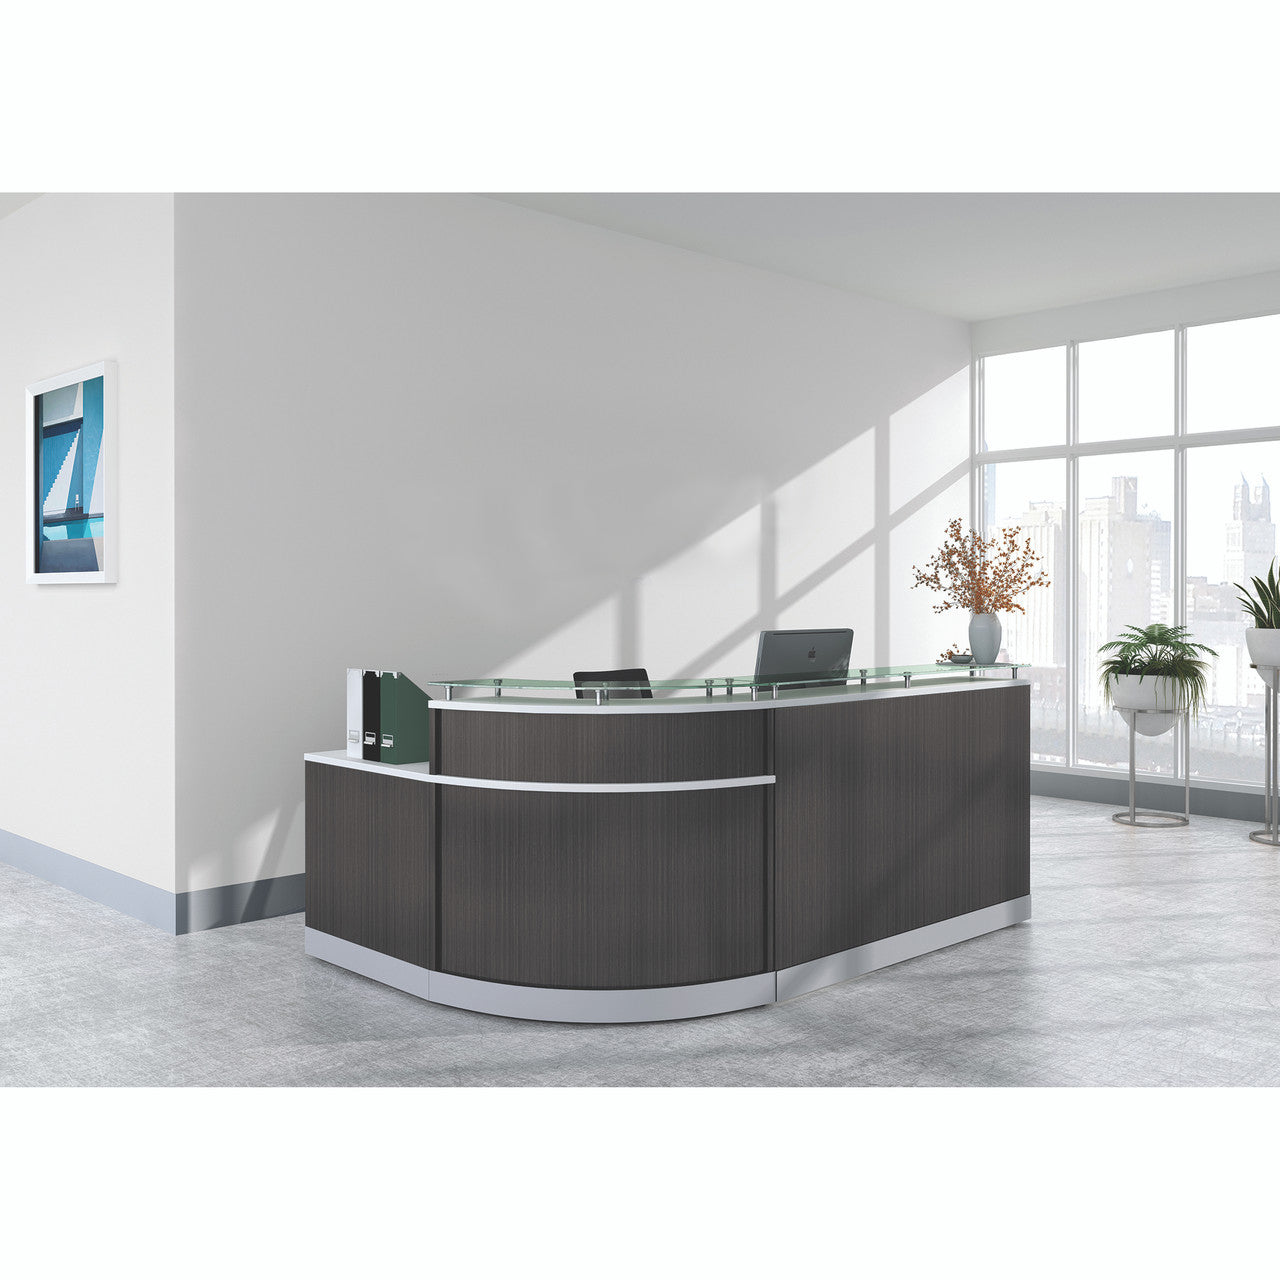 COSMO6 - Cosmo Glass Top 80" L Shaped Reception Desk w/ ADA Return by Office Source